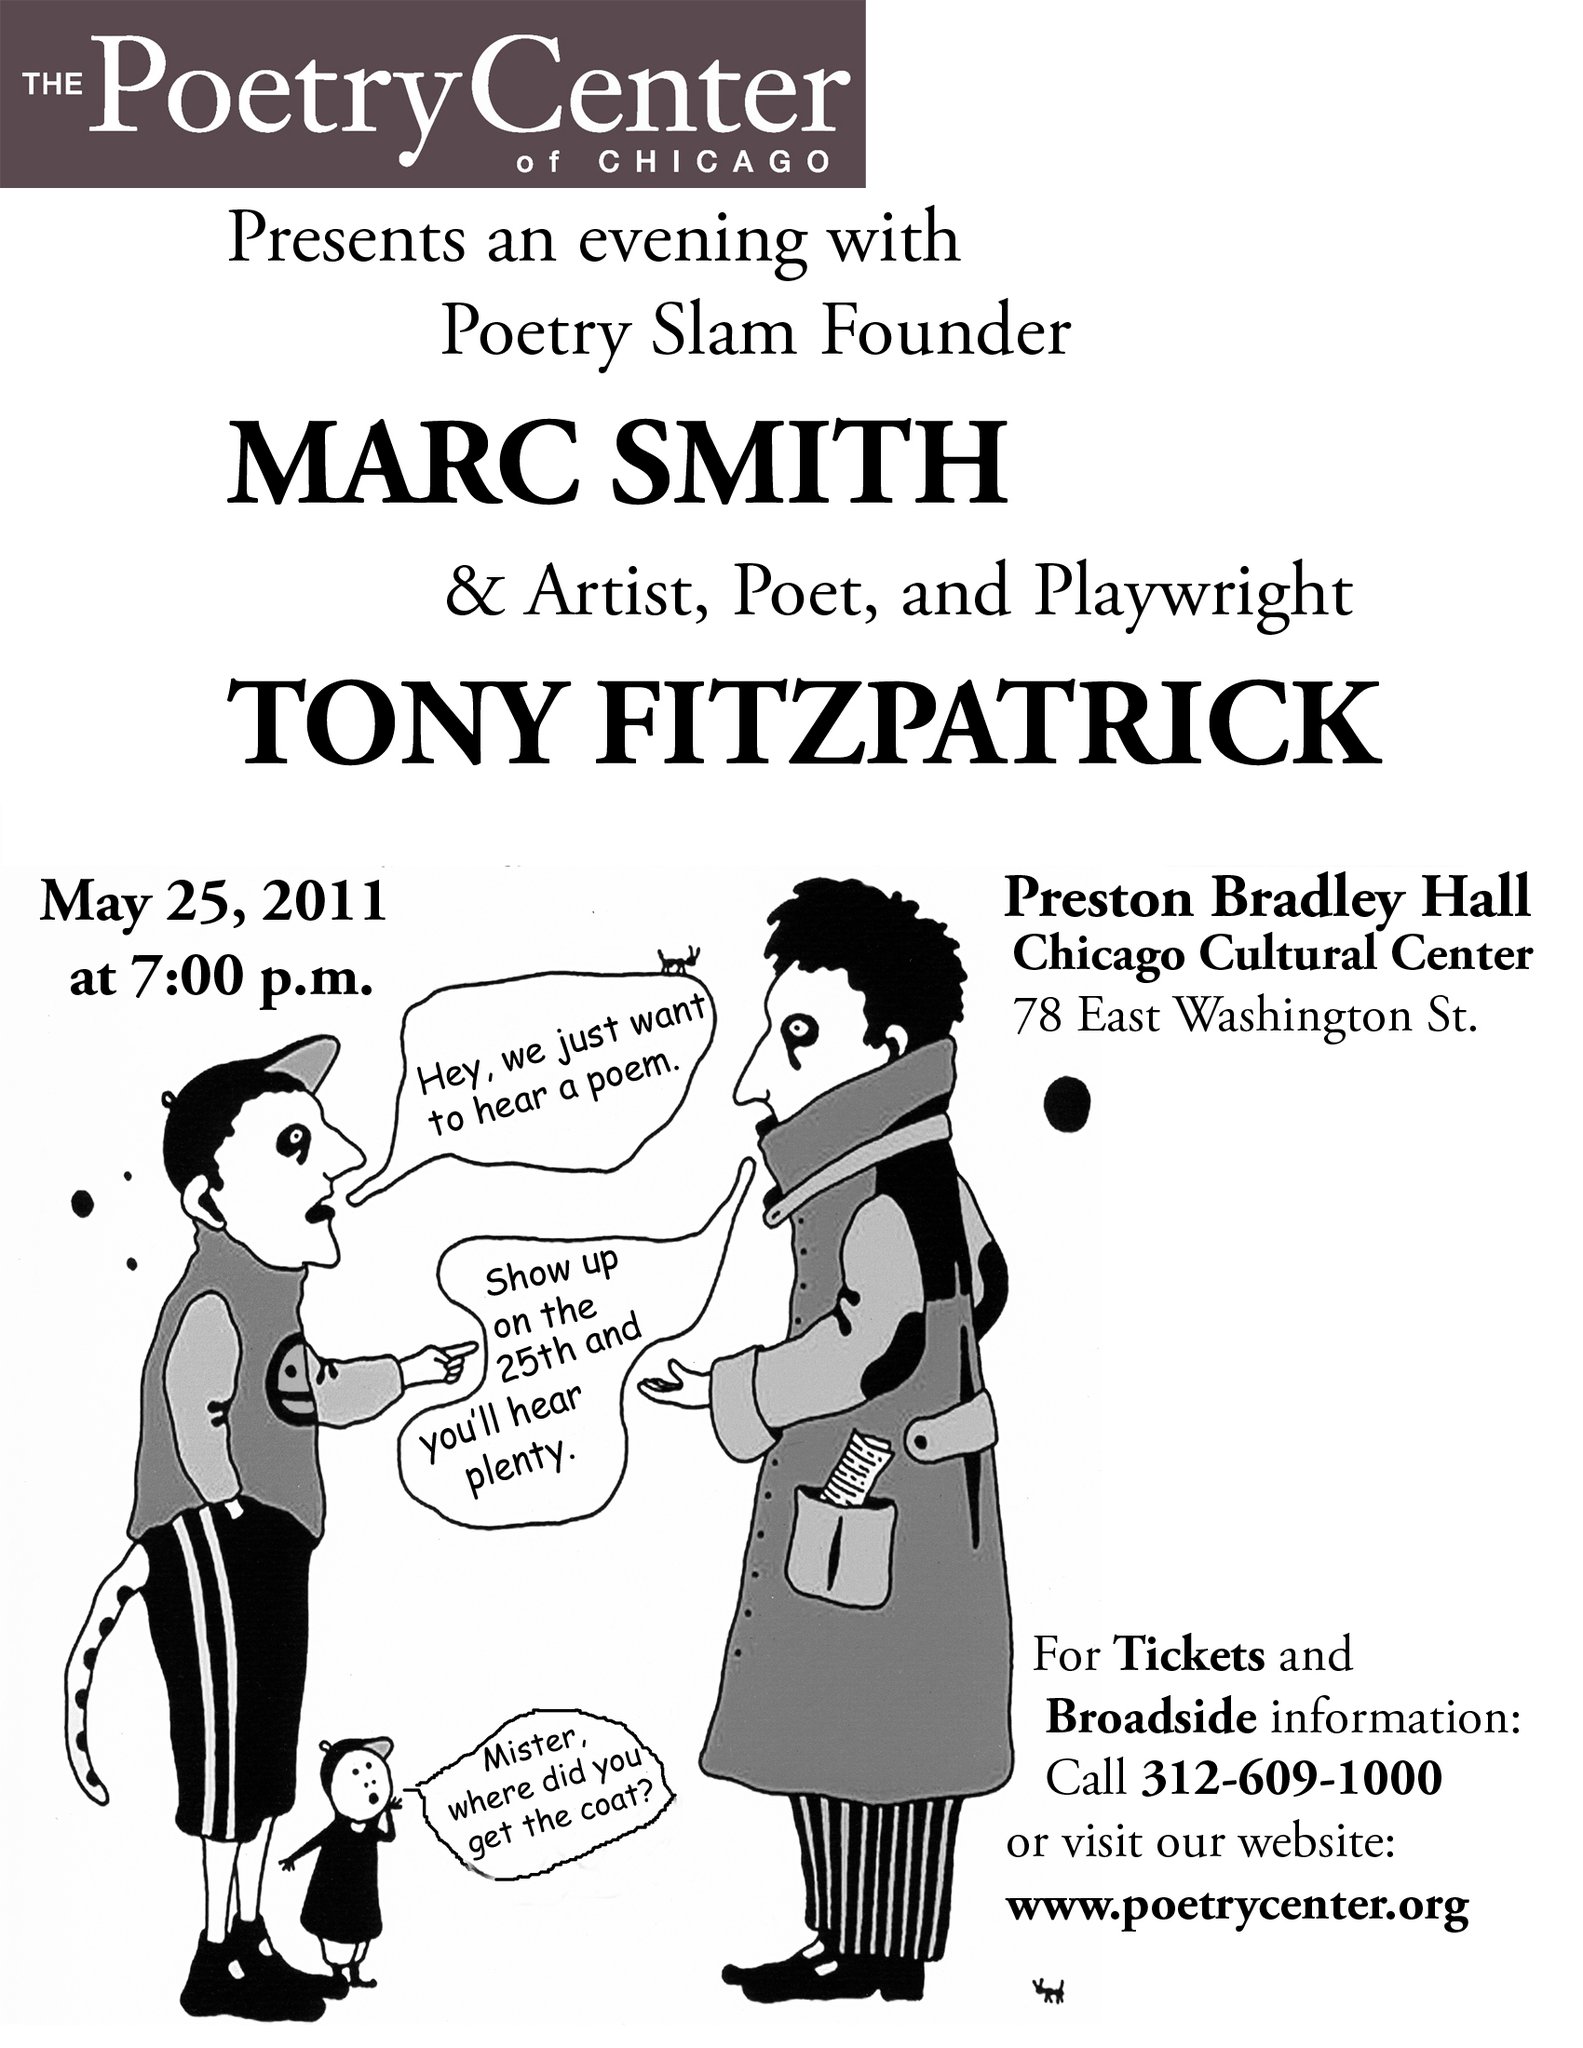 Poster for Marc Smith & Tony Fitzpatrick at the Poetry Center of Chicago, 2011.